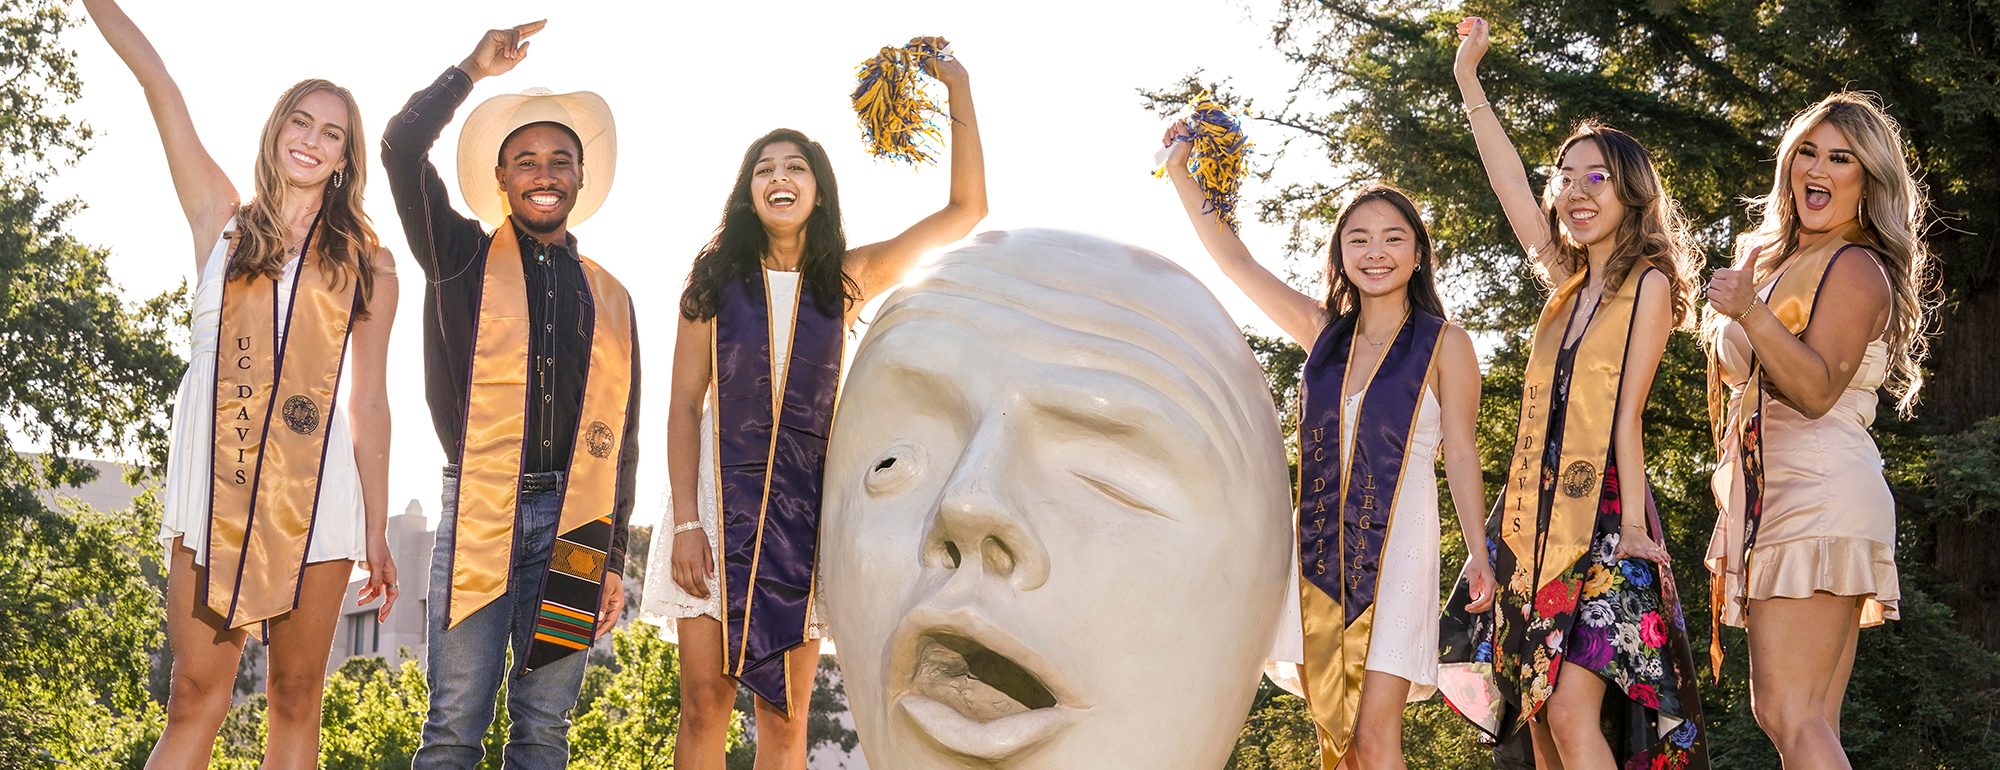 Undergraduate students in formal wear and regalia celebrating around an egg head statue.